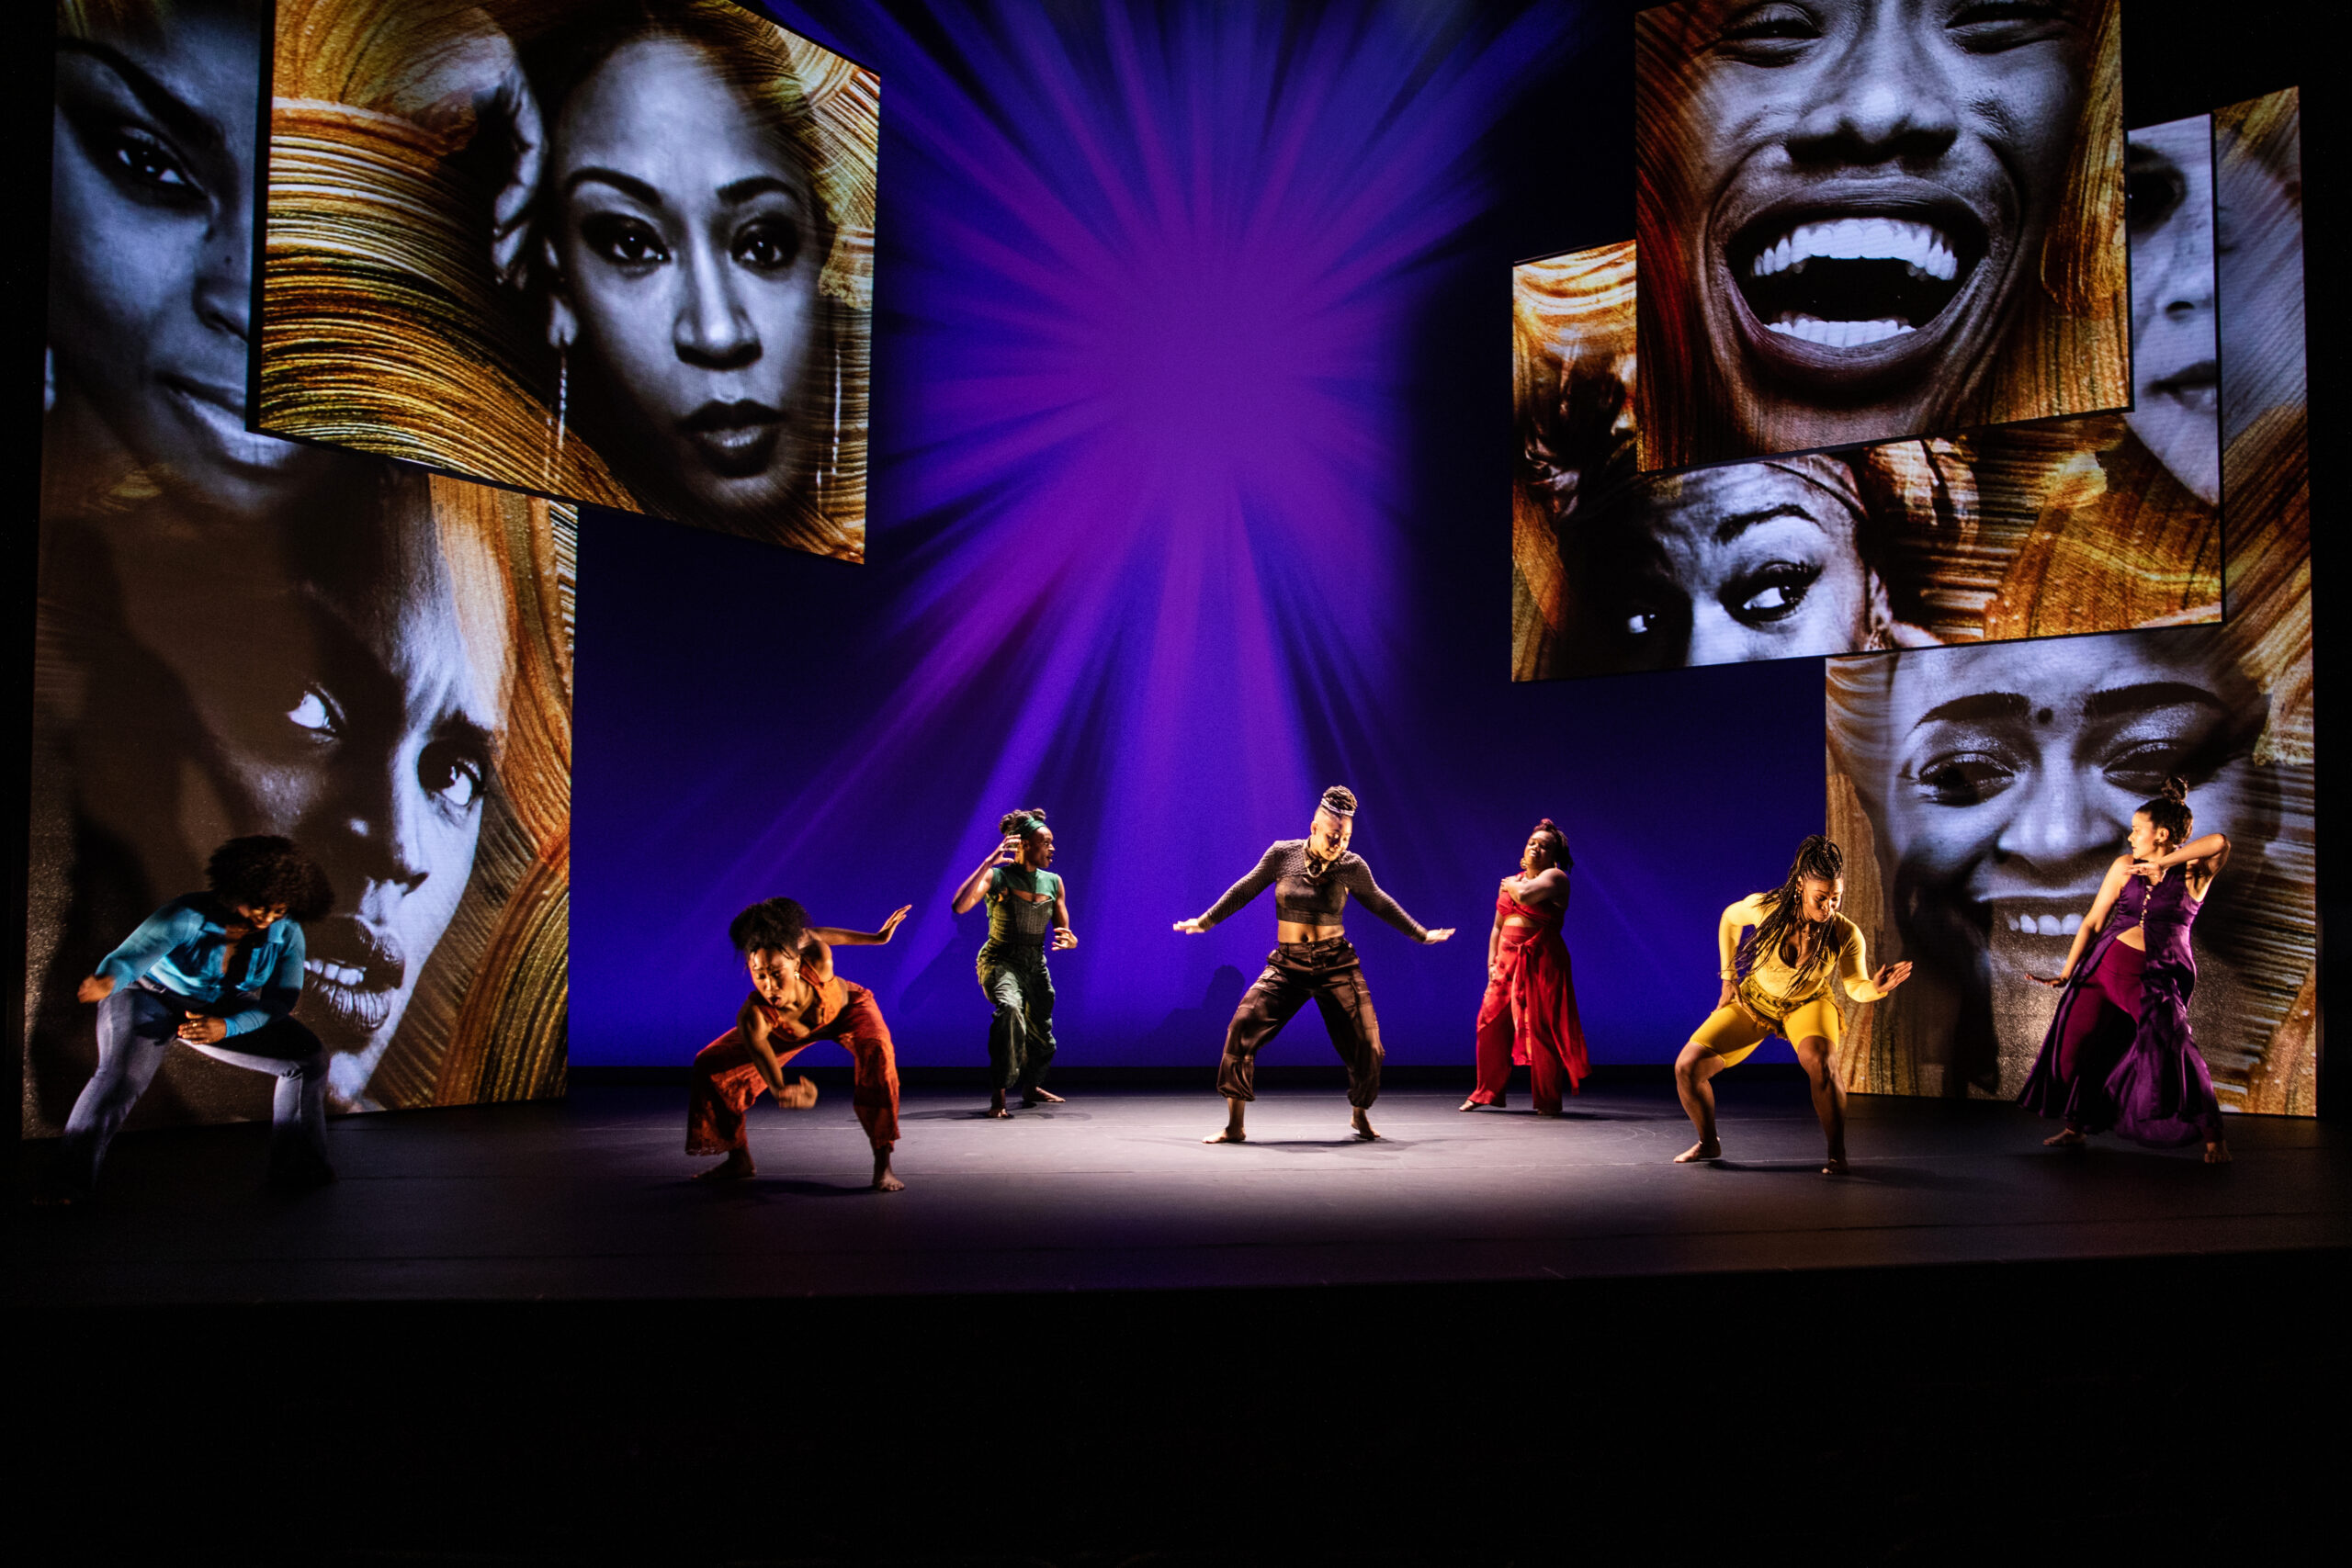 Stacey Sargeant, Amara Granderson, Okwui Okpokwasili, Tendayi Kuumba, Kenita R. Miller, D. Woods, and Alexandria Wailes in for colored girls who have considered suicide/ when the rainbow is enuf. Photo by Marc J. Franklin.